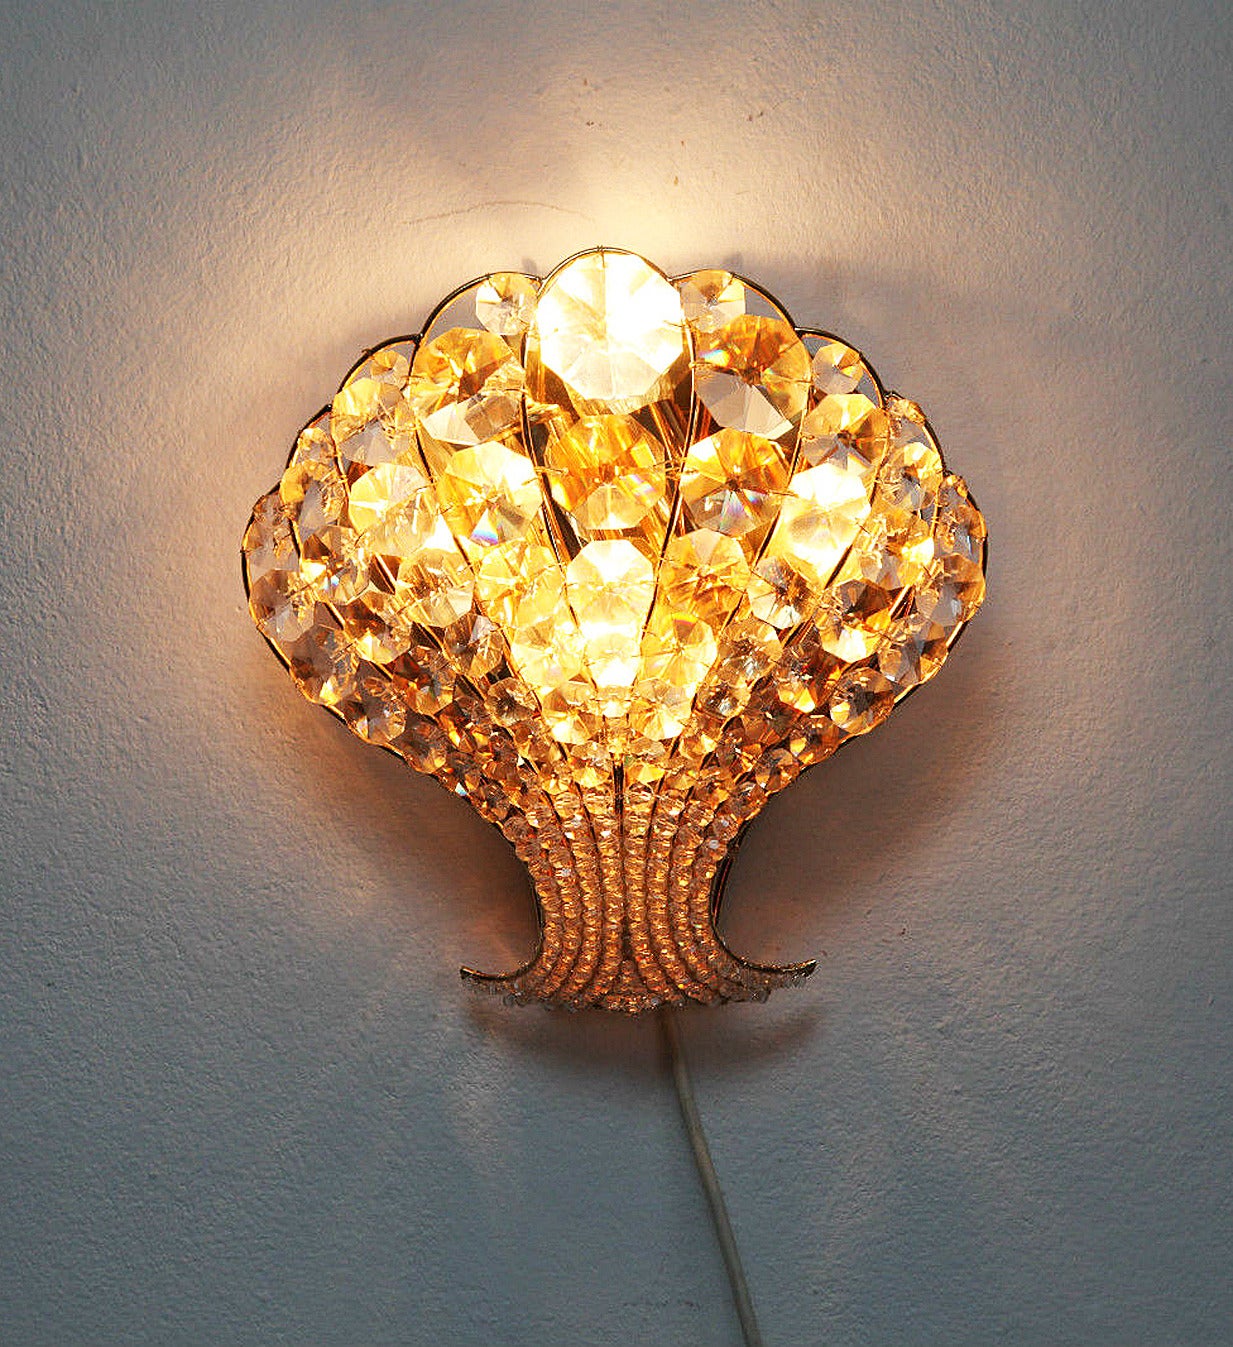 Wall lamp of Palwa 60s in shell shape
Condition: very good, only slight signs of wear.
4x 25W E14
Dimensions;
Height: ca 30 cm (11.81in)
Width: ca. 28 cm (11.02in)
Depth 9 cm (3.54in)